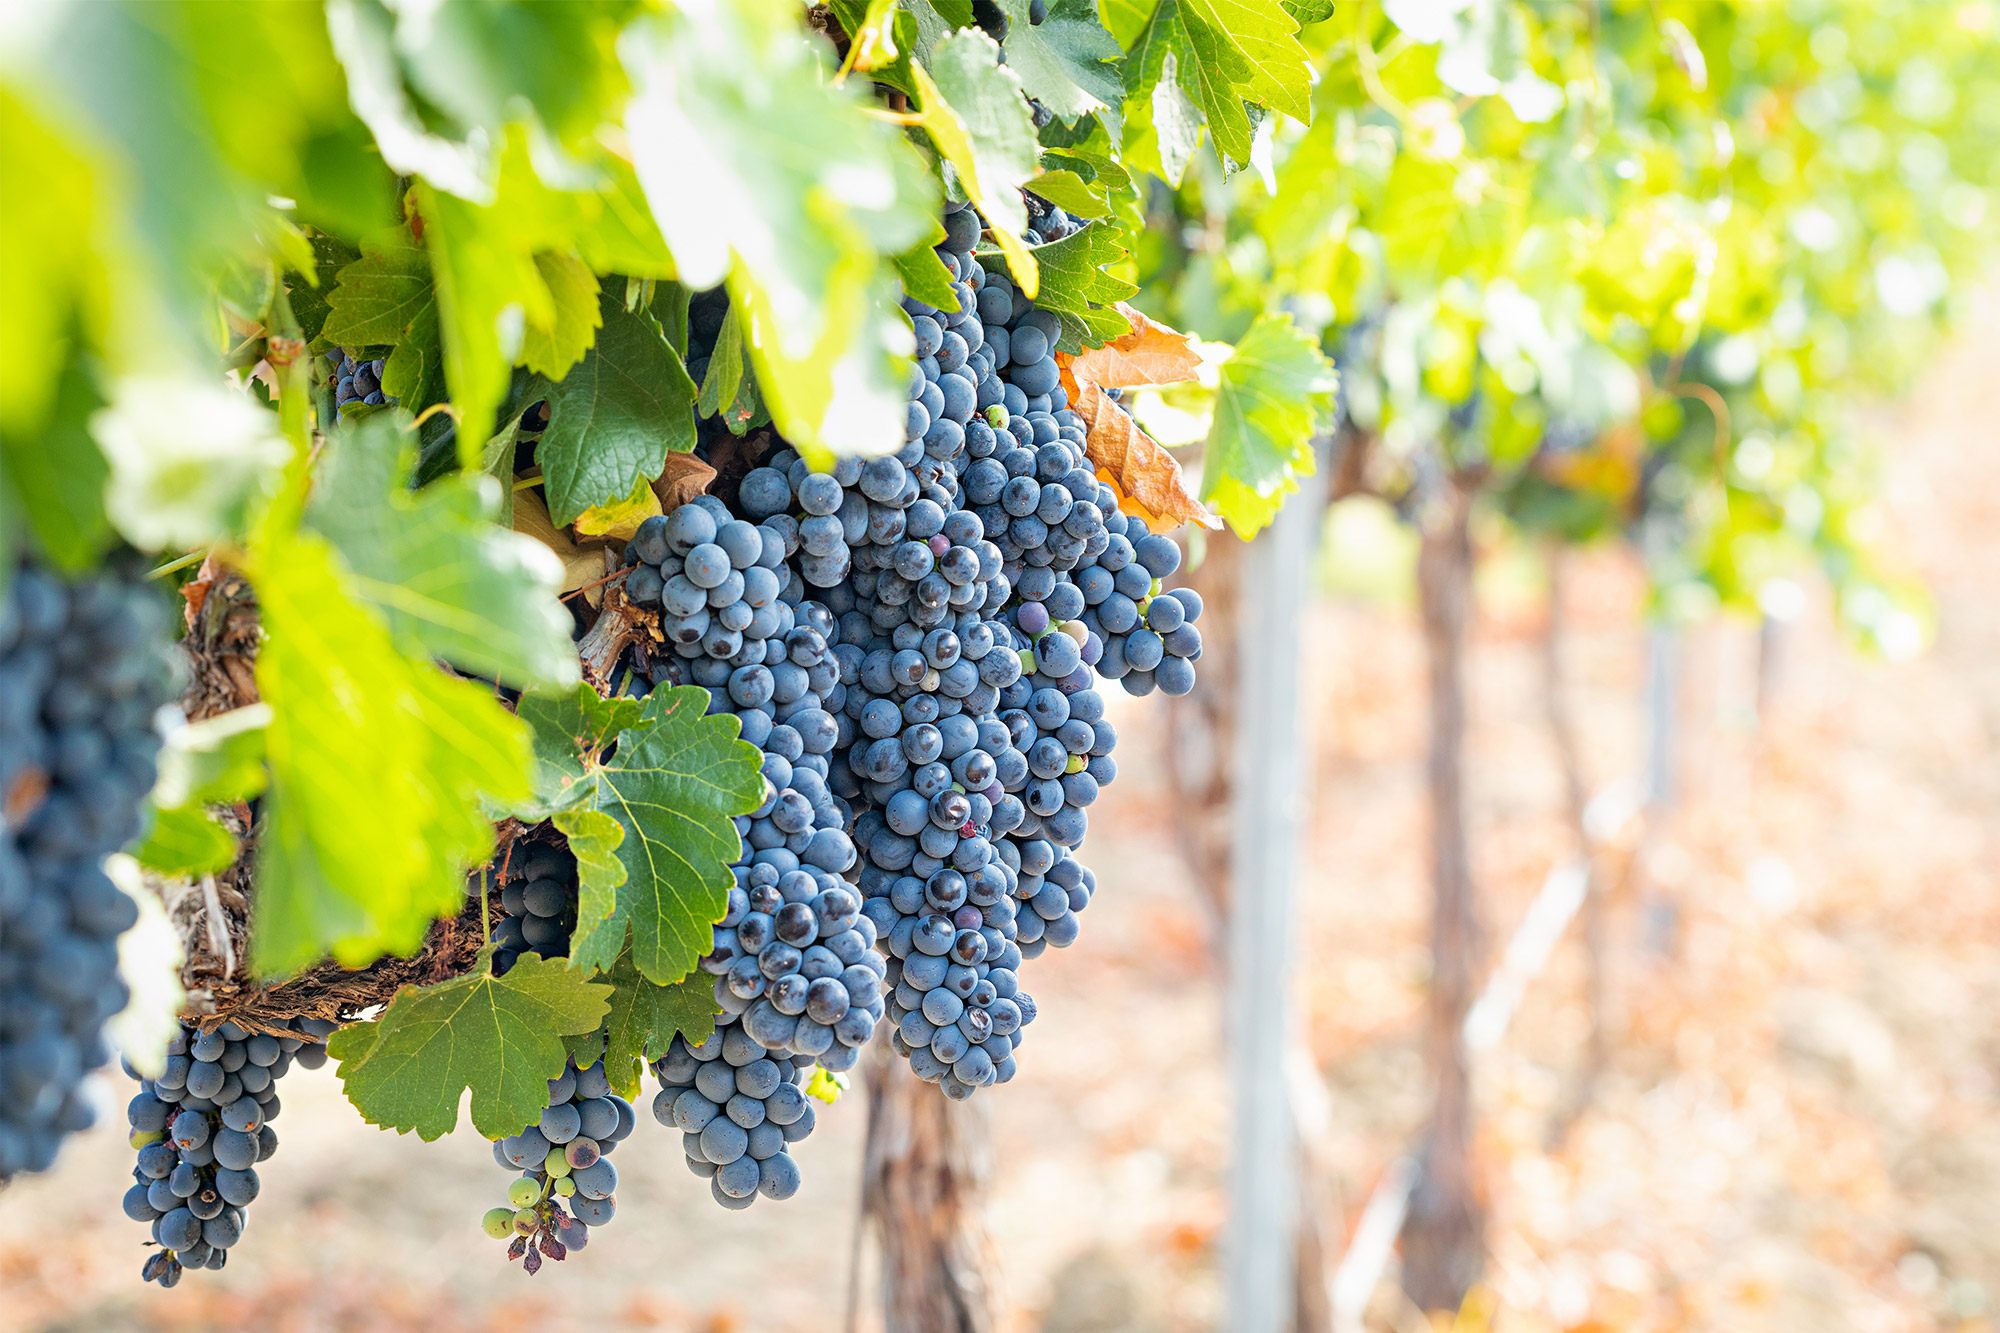 Merlot – All info about the grape variety